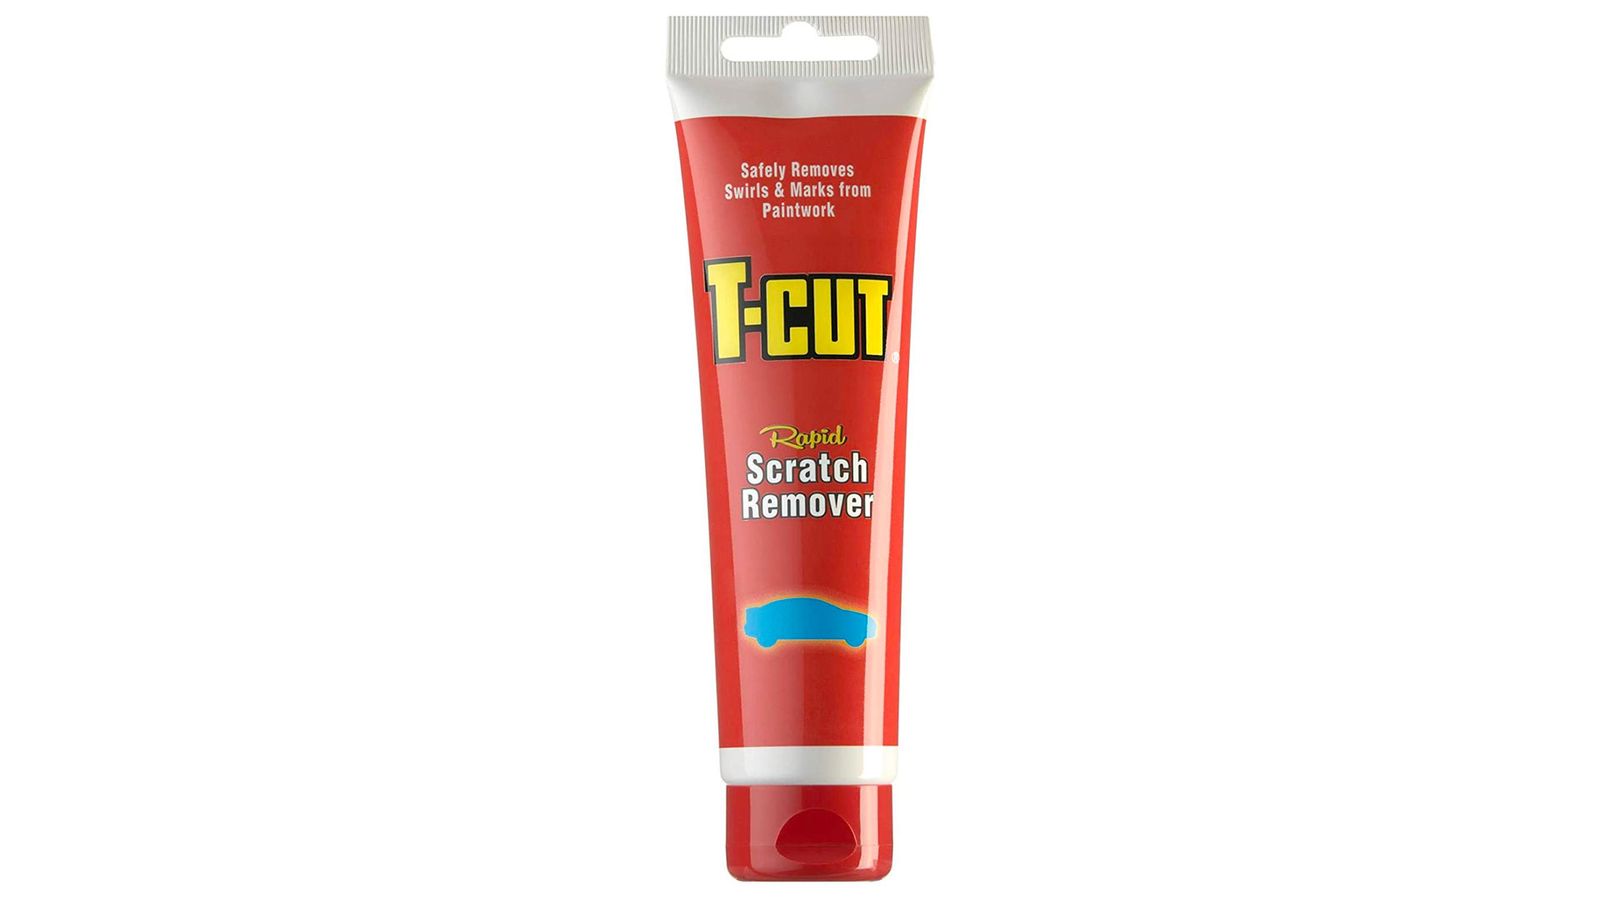 T-Cut Rapid Scratch Remover product image of a red tube bottle with a yellow label.